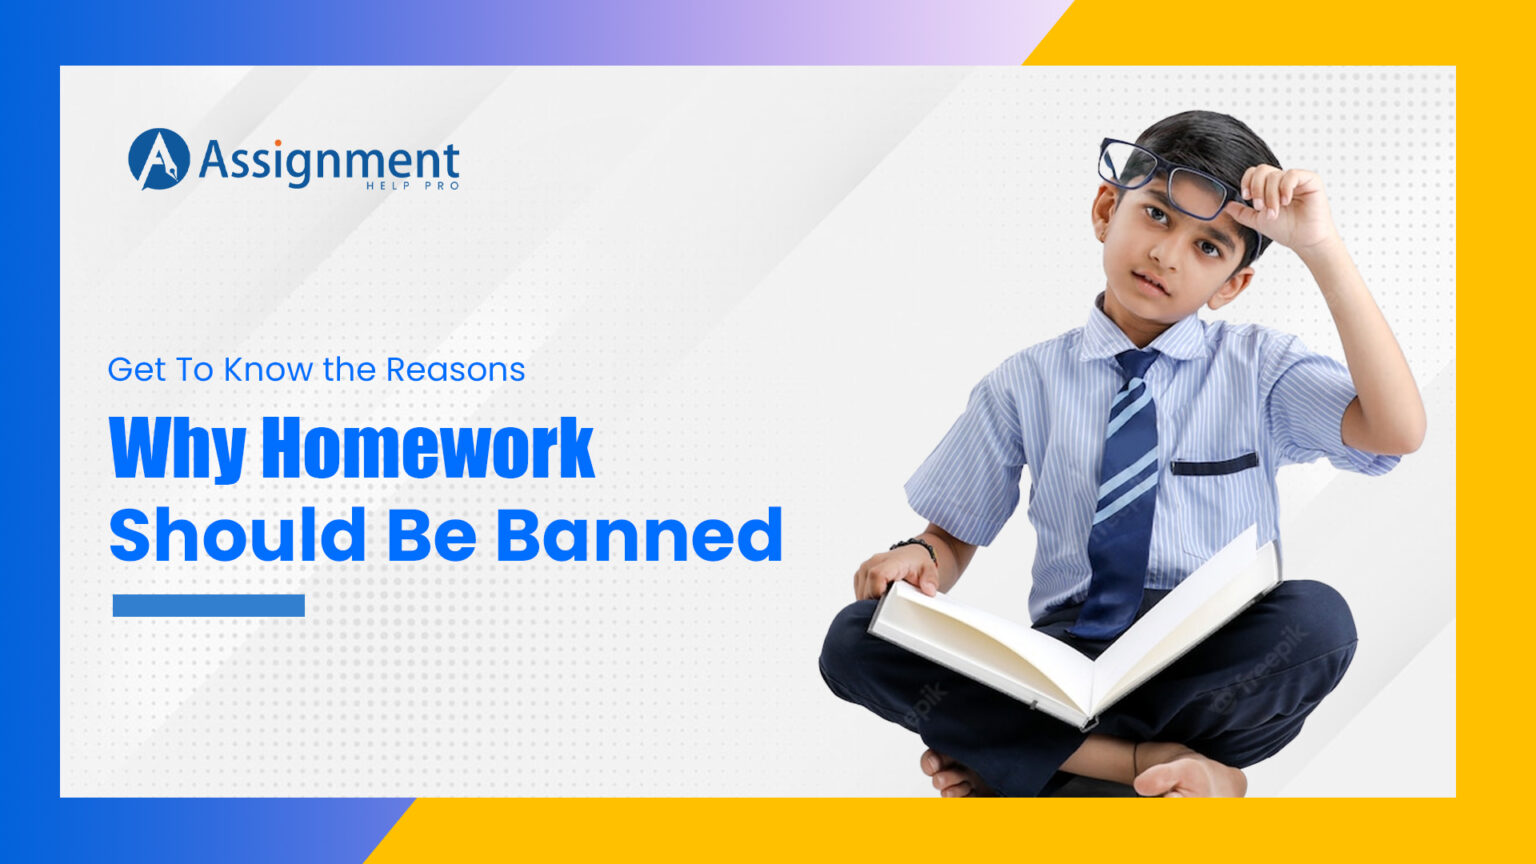 should homework be banned in all schools